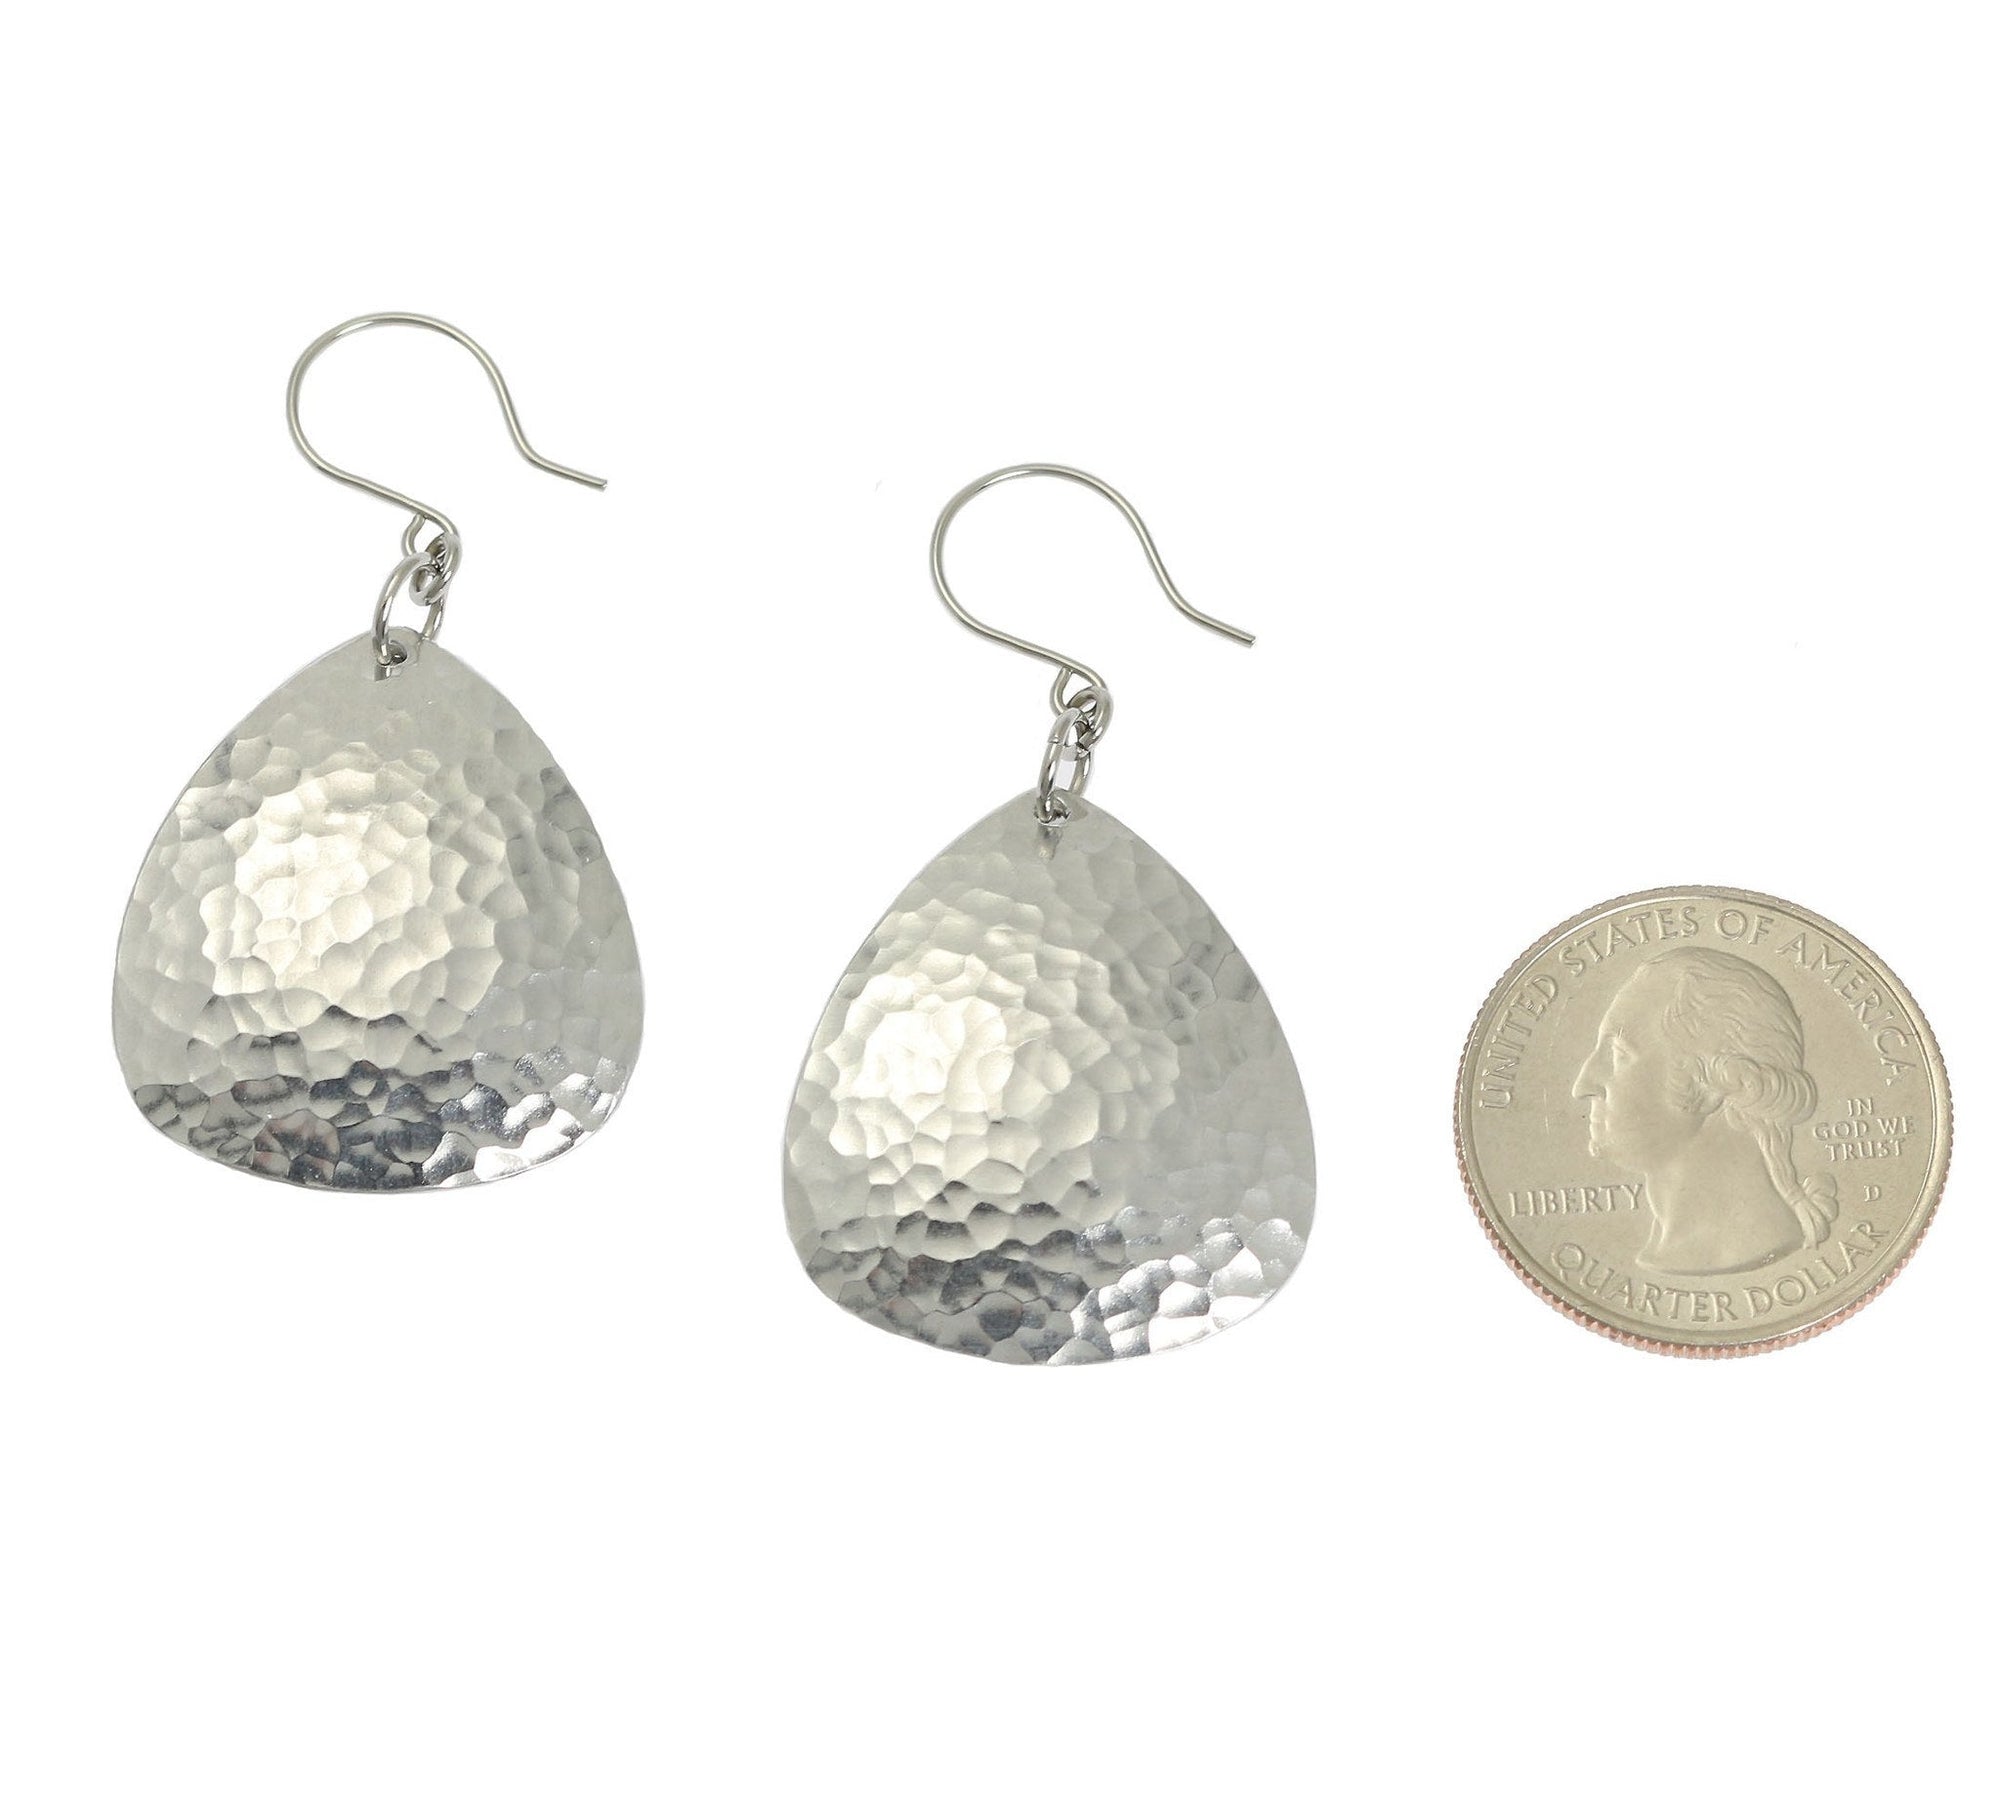 Size of Hammered Triangular Aluminum Drop Earrings